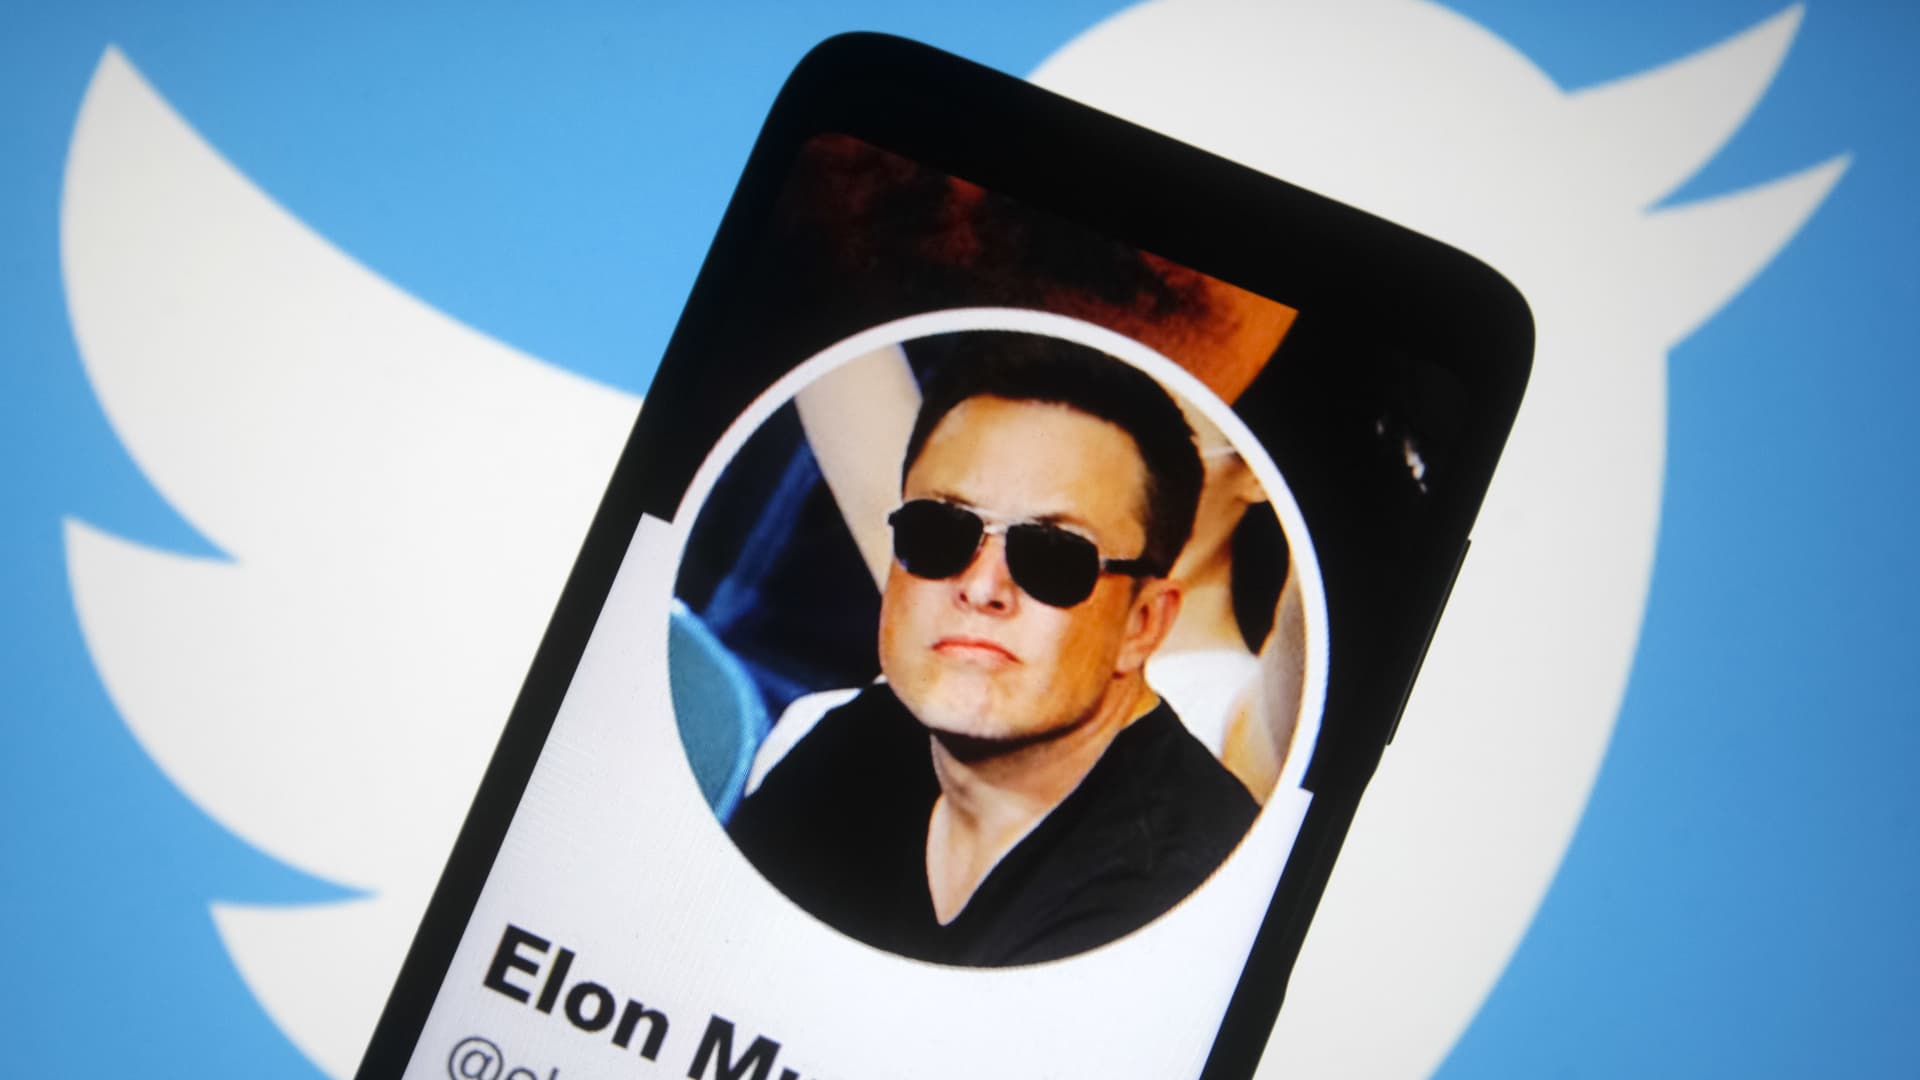 Elon Musk says 3 issues need to be resolved before his Twitter buyout can go ahe..